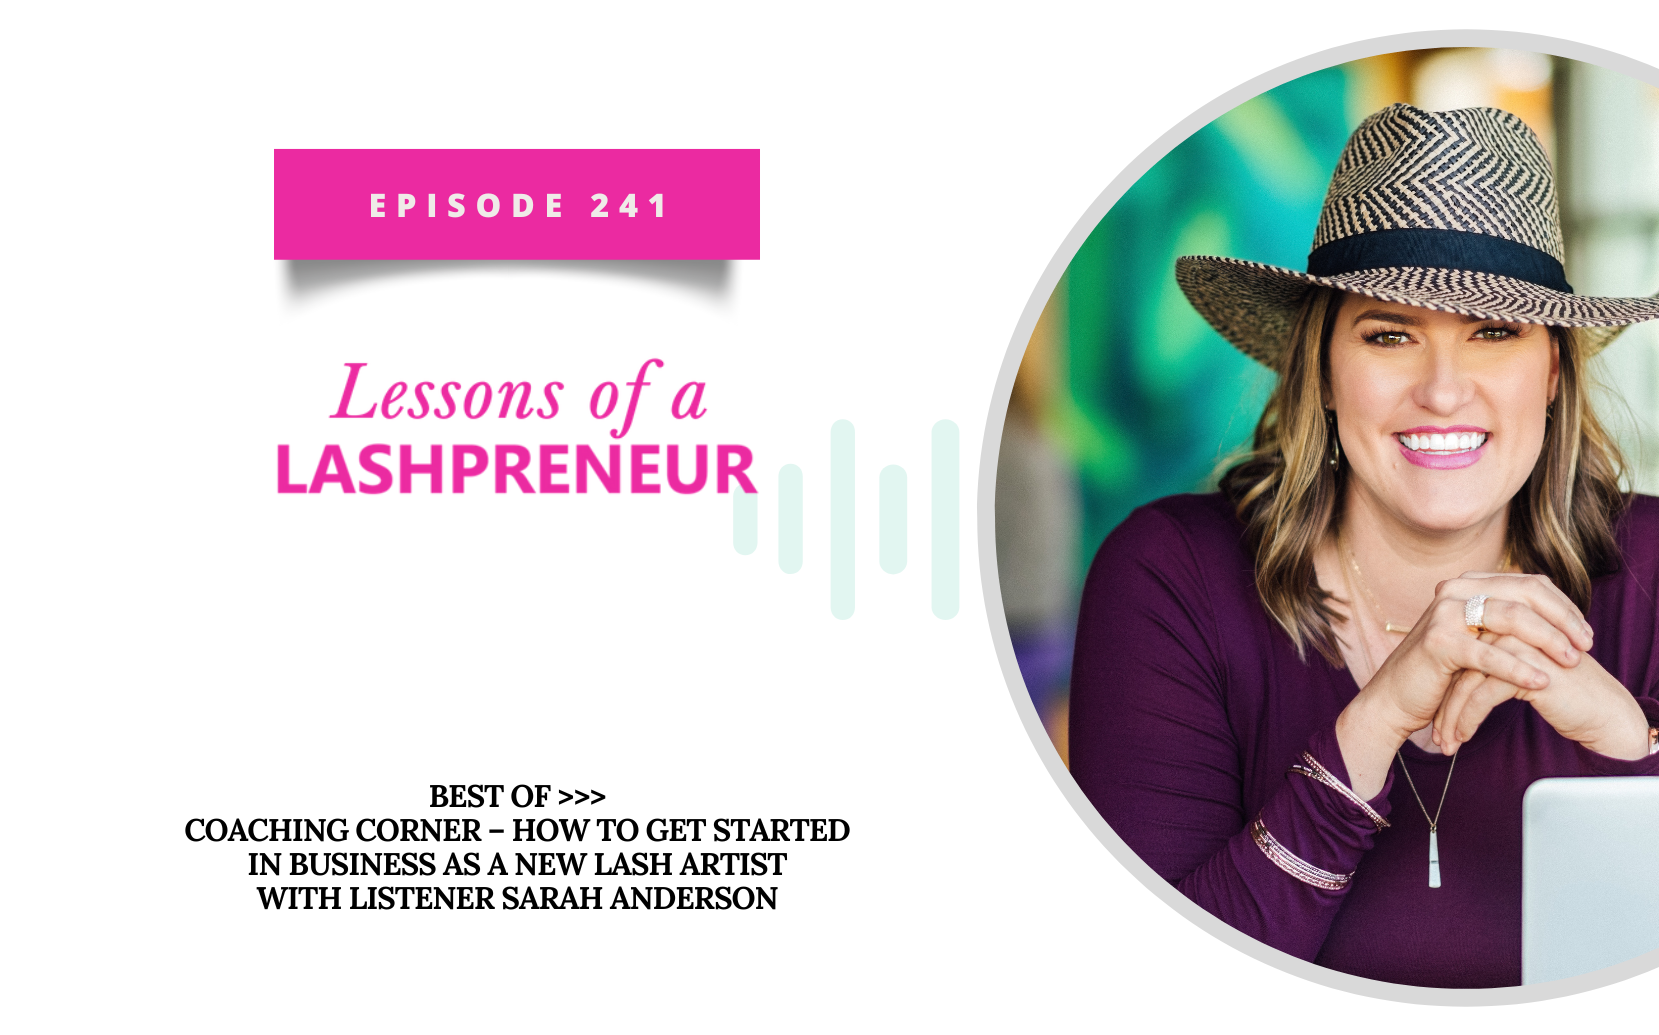 BEST OF >>> Coaching Corner – How to Get Started in Business as a New Lash Artist with Listener Sarah Anderson